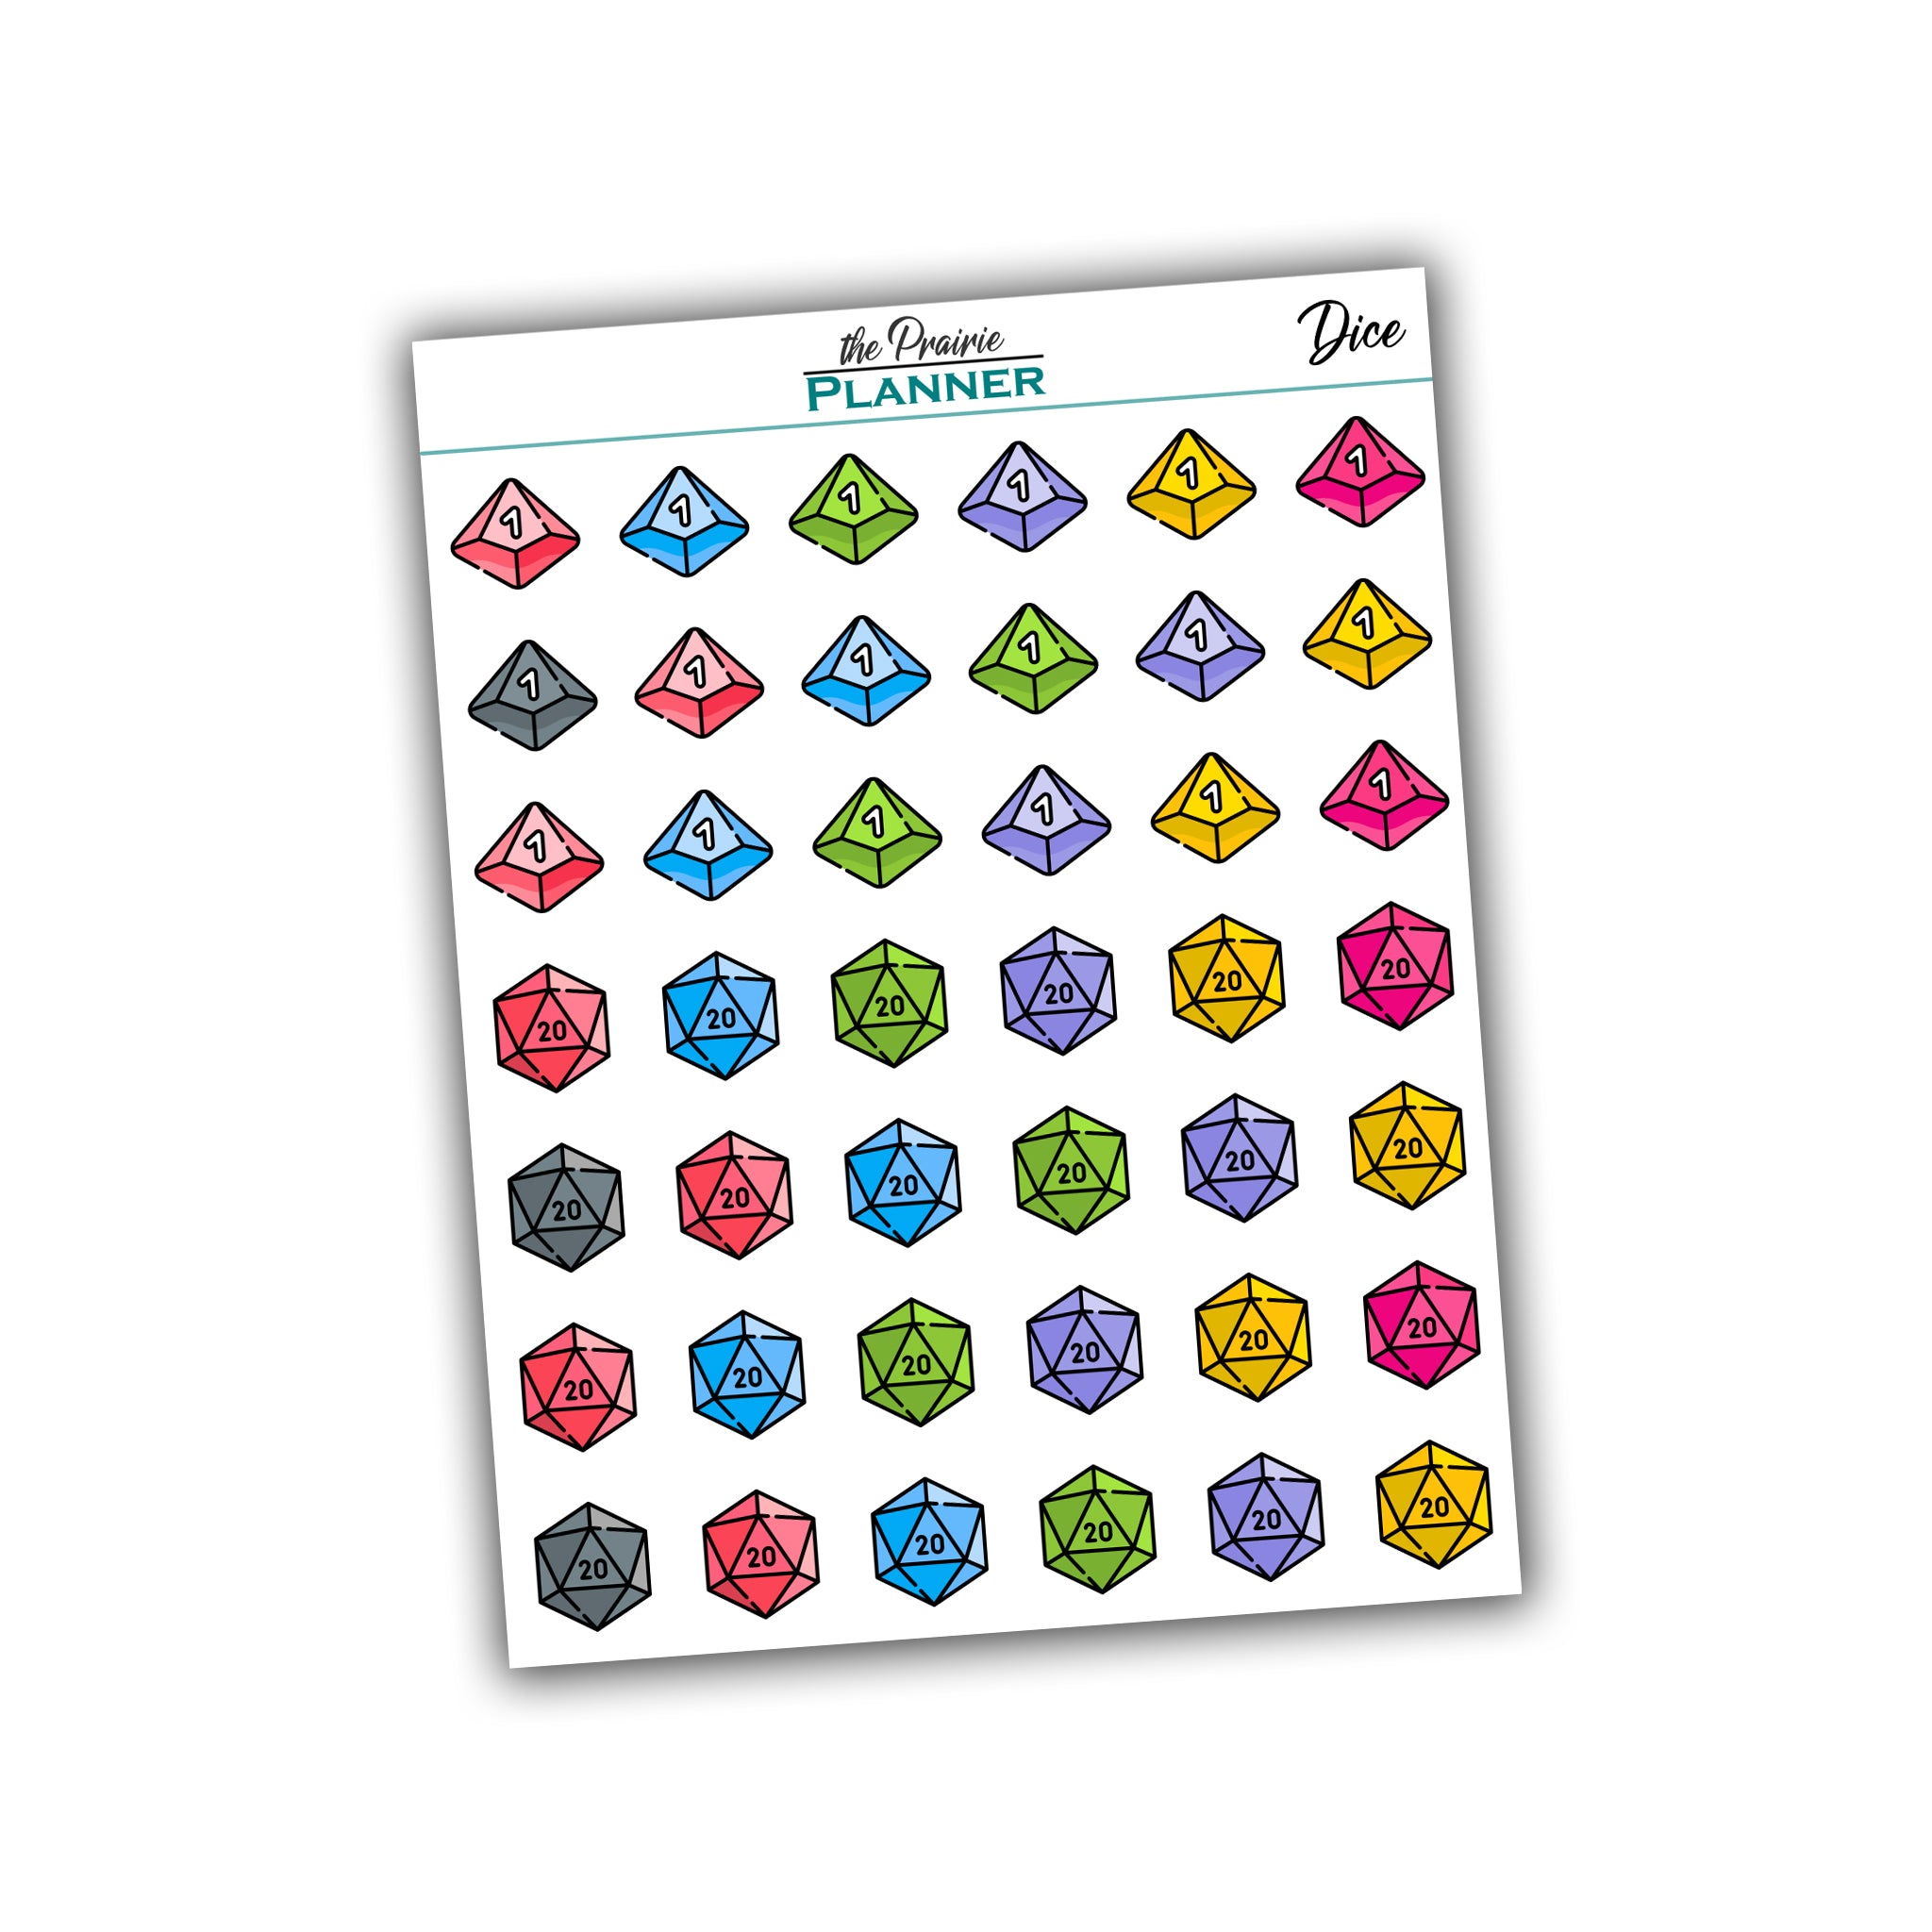 Dice - Planner Stickers